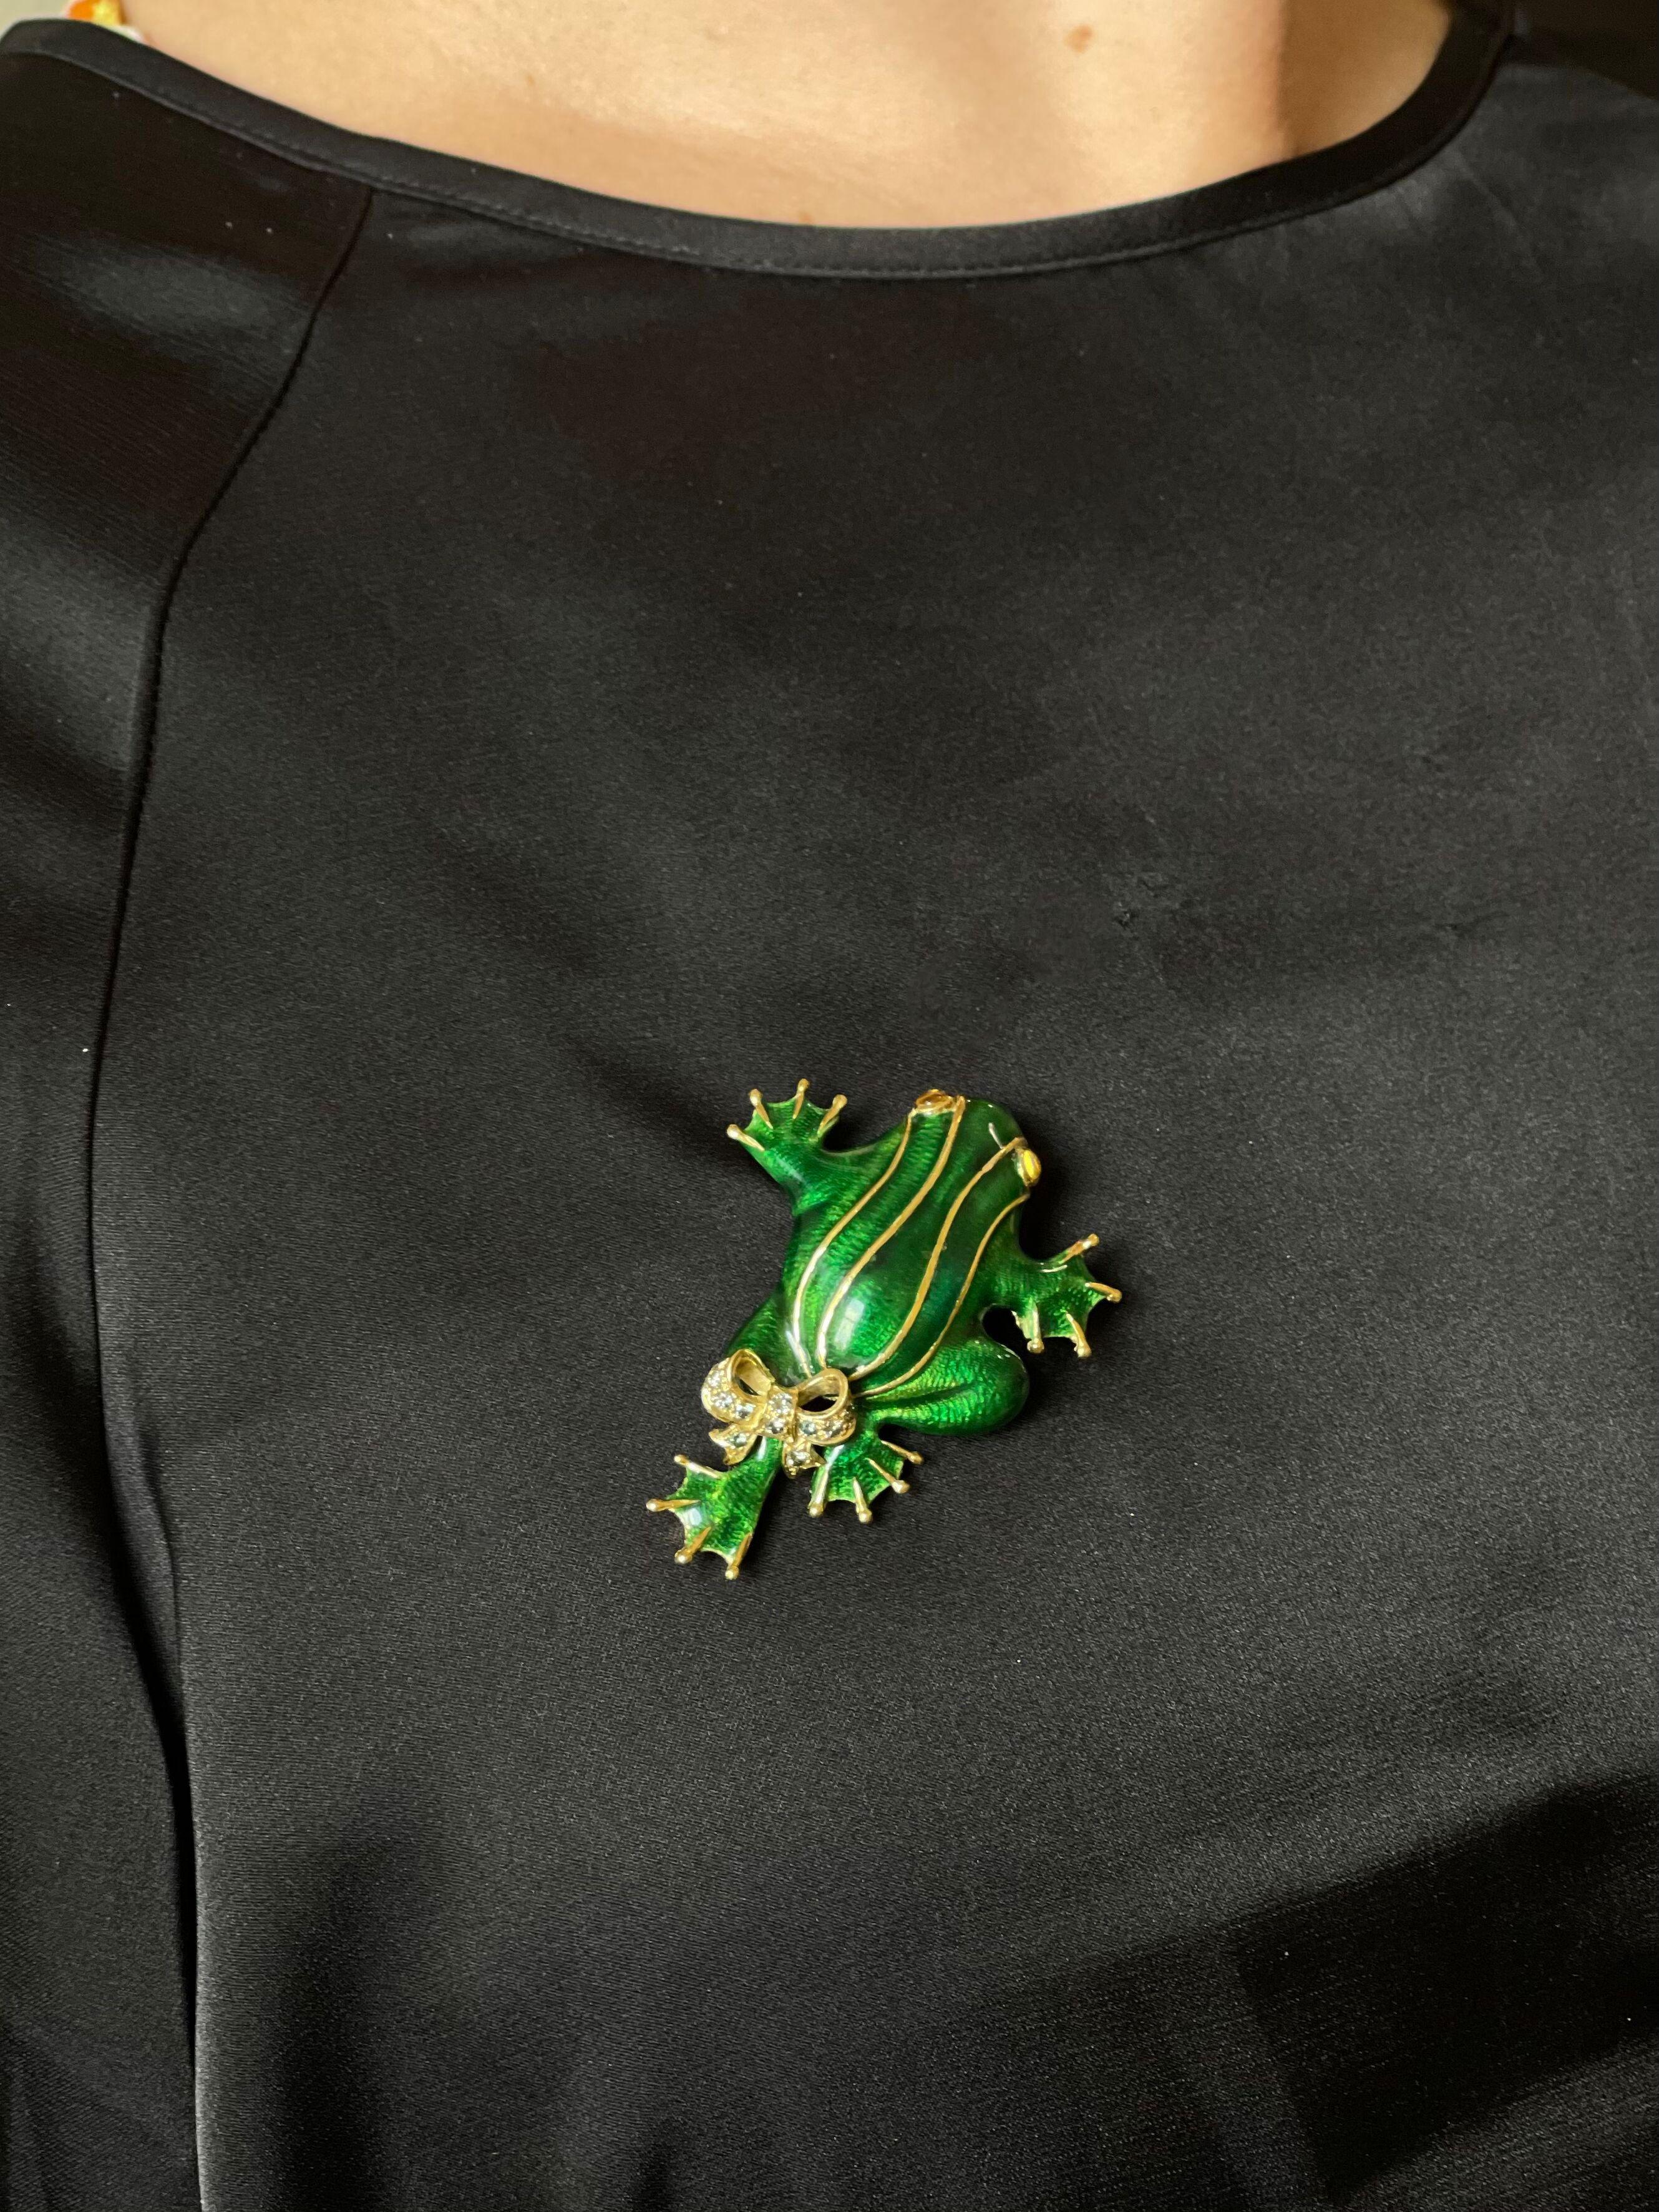 Enamel Fancy Diamond Gold Frog Brooch Pin In Excellent Condition For Sale In New York, NY